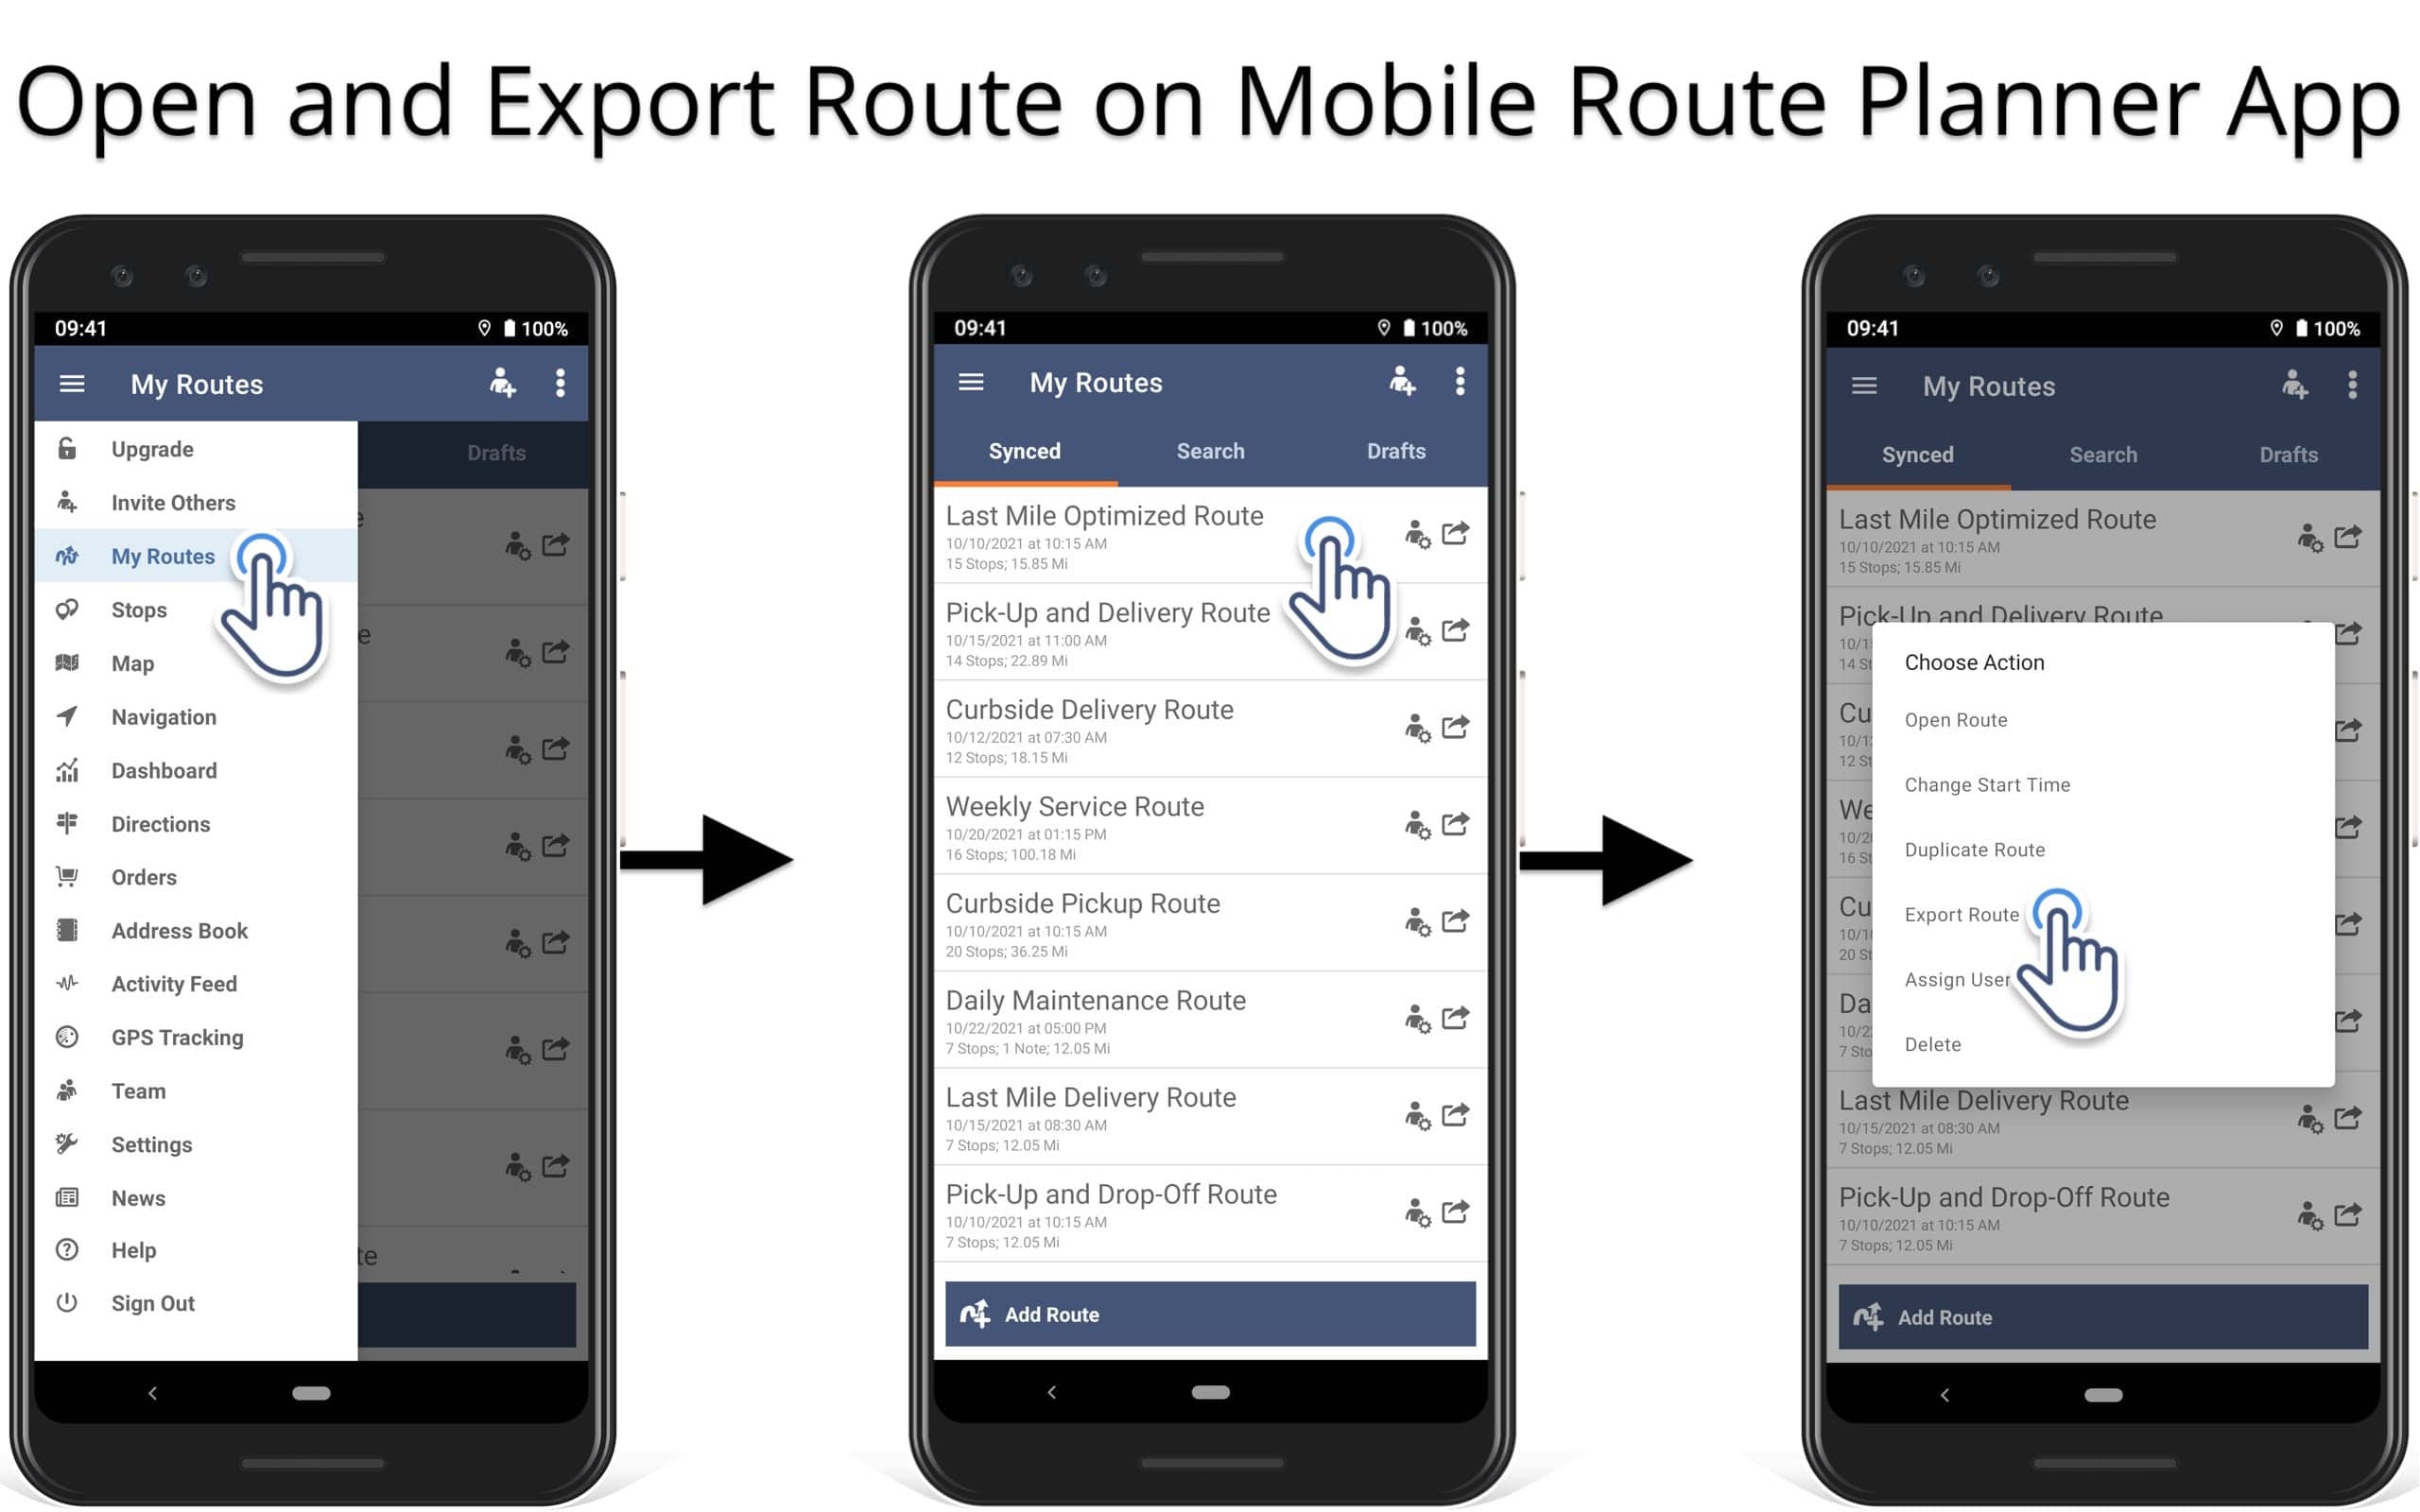 Export planned routes from the route planner app to your Android smartphone or tablet.